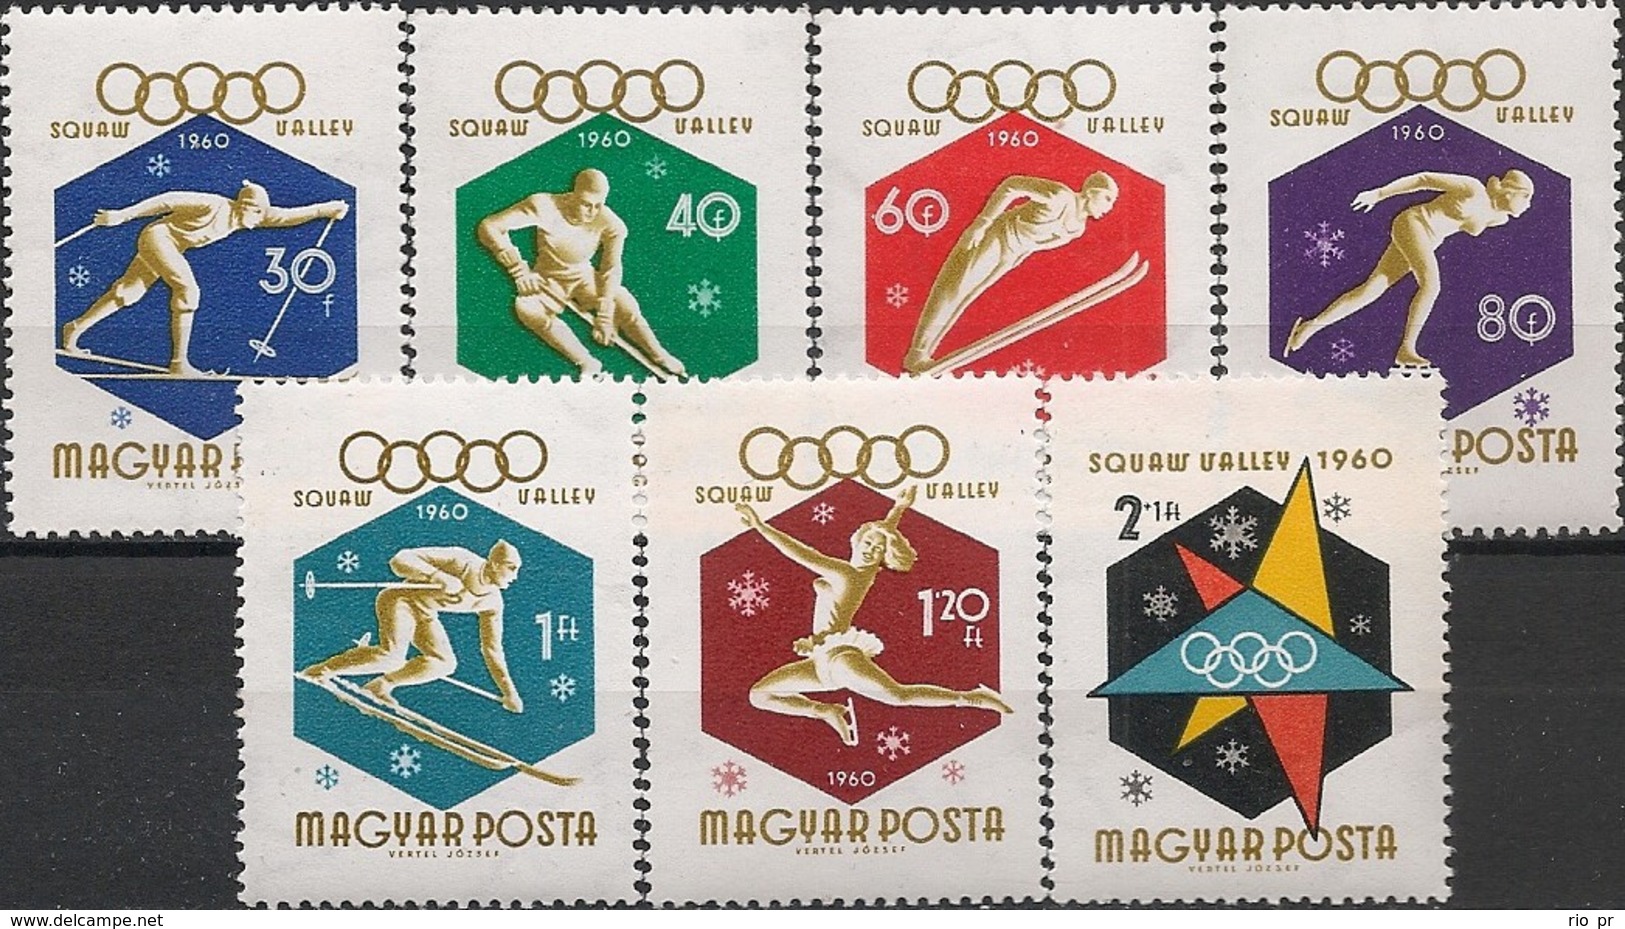 HUNGARY - COMPLETE SET SQUAW VALLEY'60 WINTER OLYMPIC GAMES 1960 - MNH - Invierno 1960: Squaw Valley